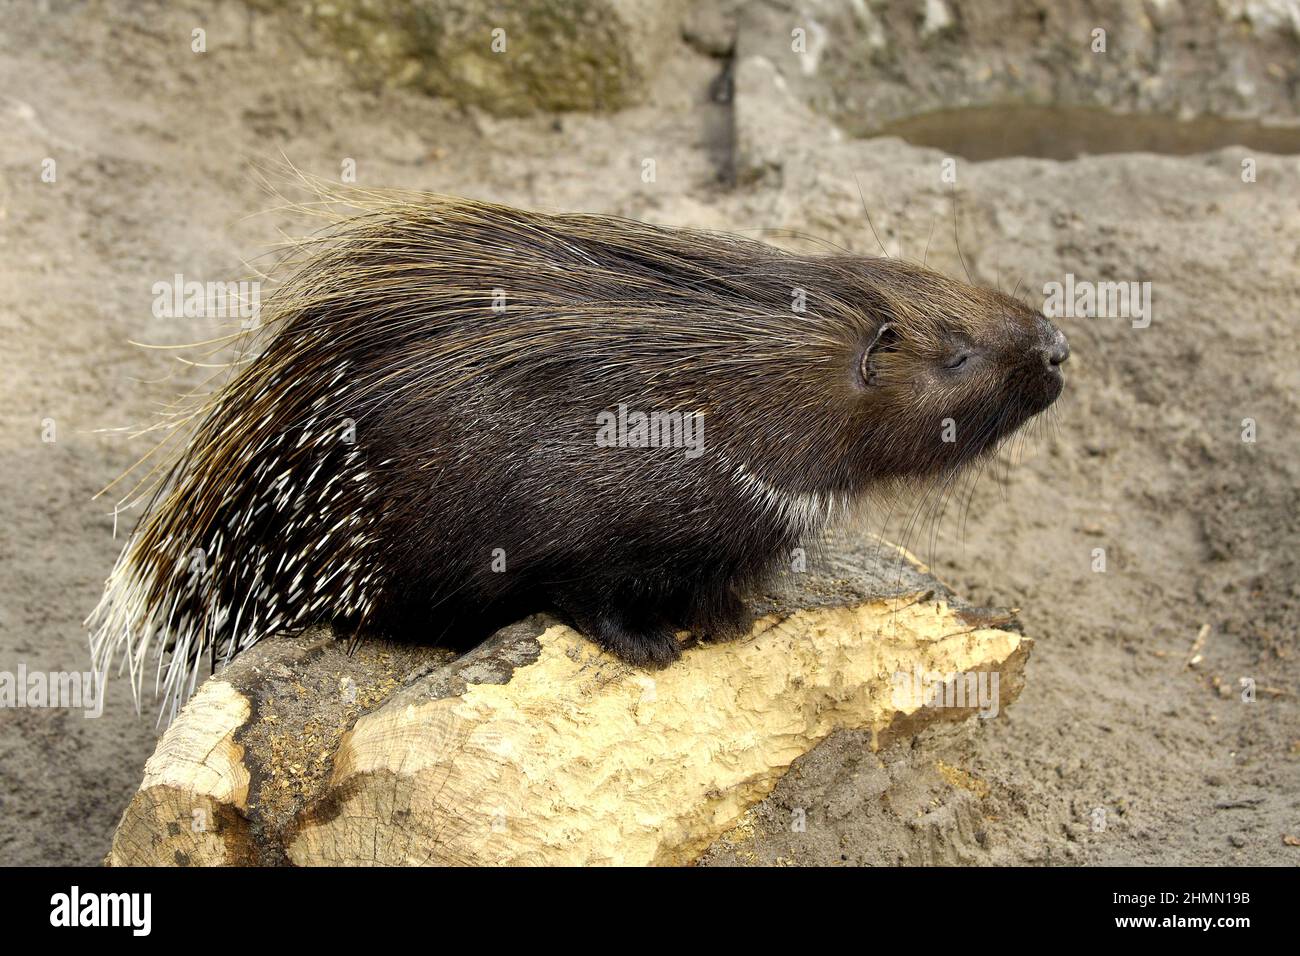 Indian Crested Porcupine (Hystrix leucura), snoozing Stock Photo